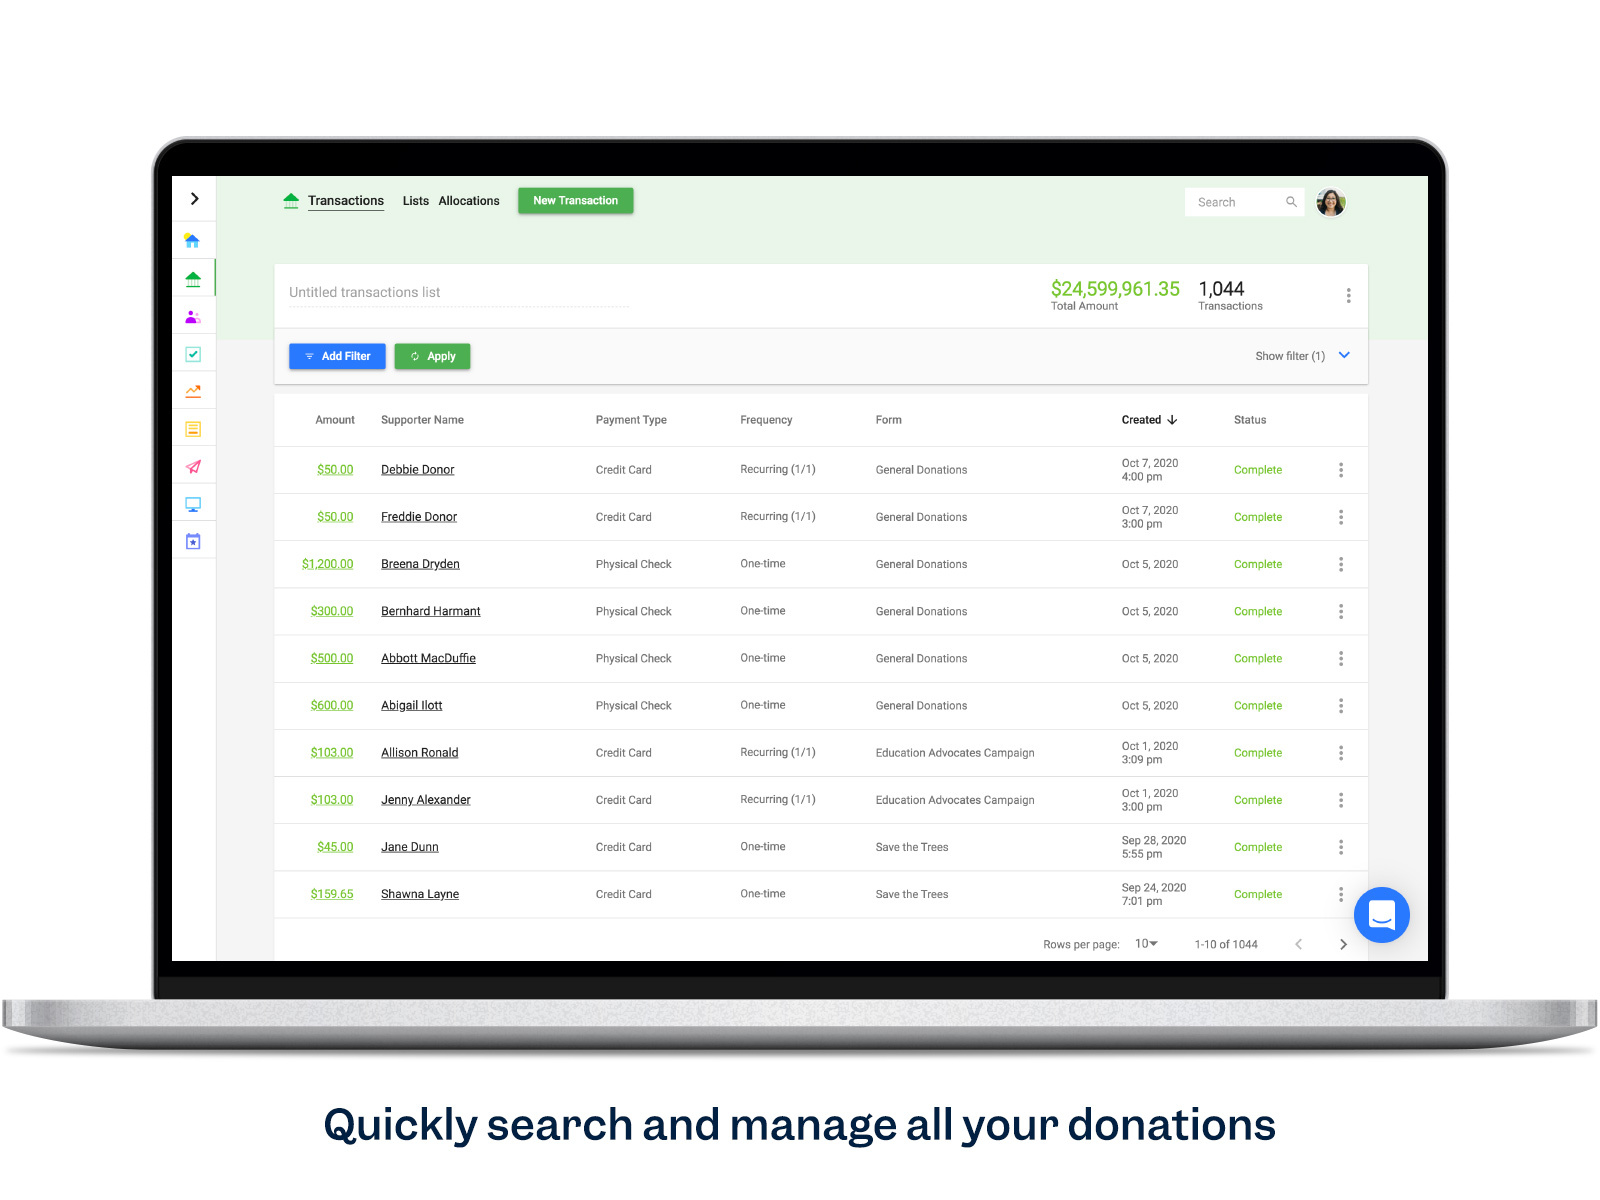 Manage donations in one place